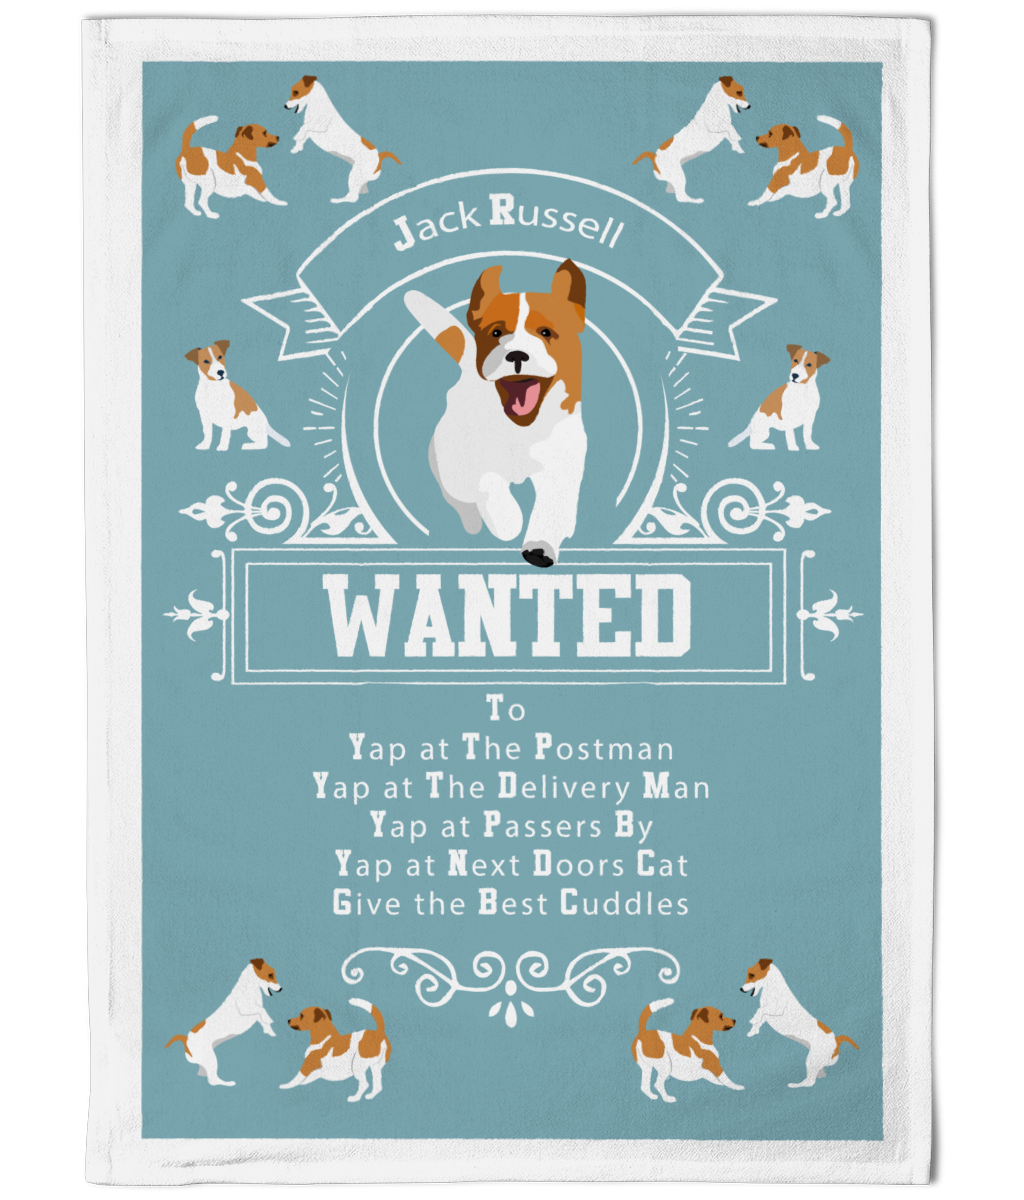 Jack Russell Wanted Cotton Tea Towel Blue